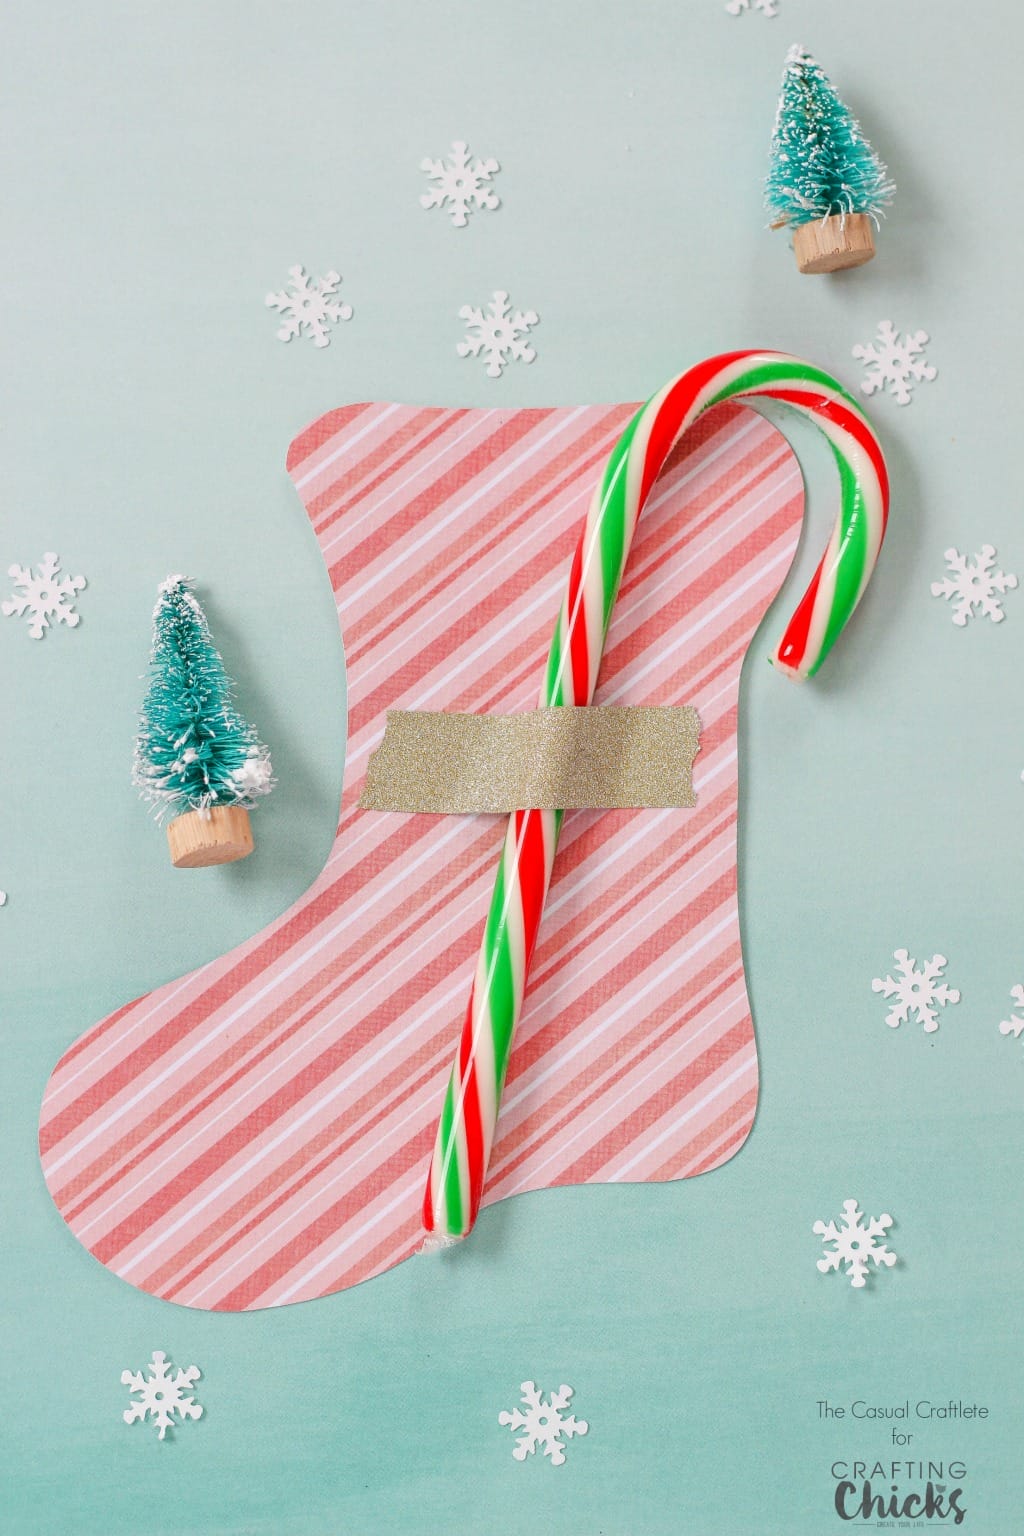 Use this Free Printable Stocking Template for a cute and easy gift idea for kids. Attach a candy cane using tape and you're done!